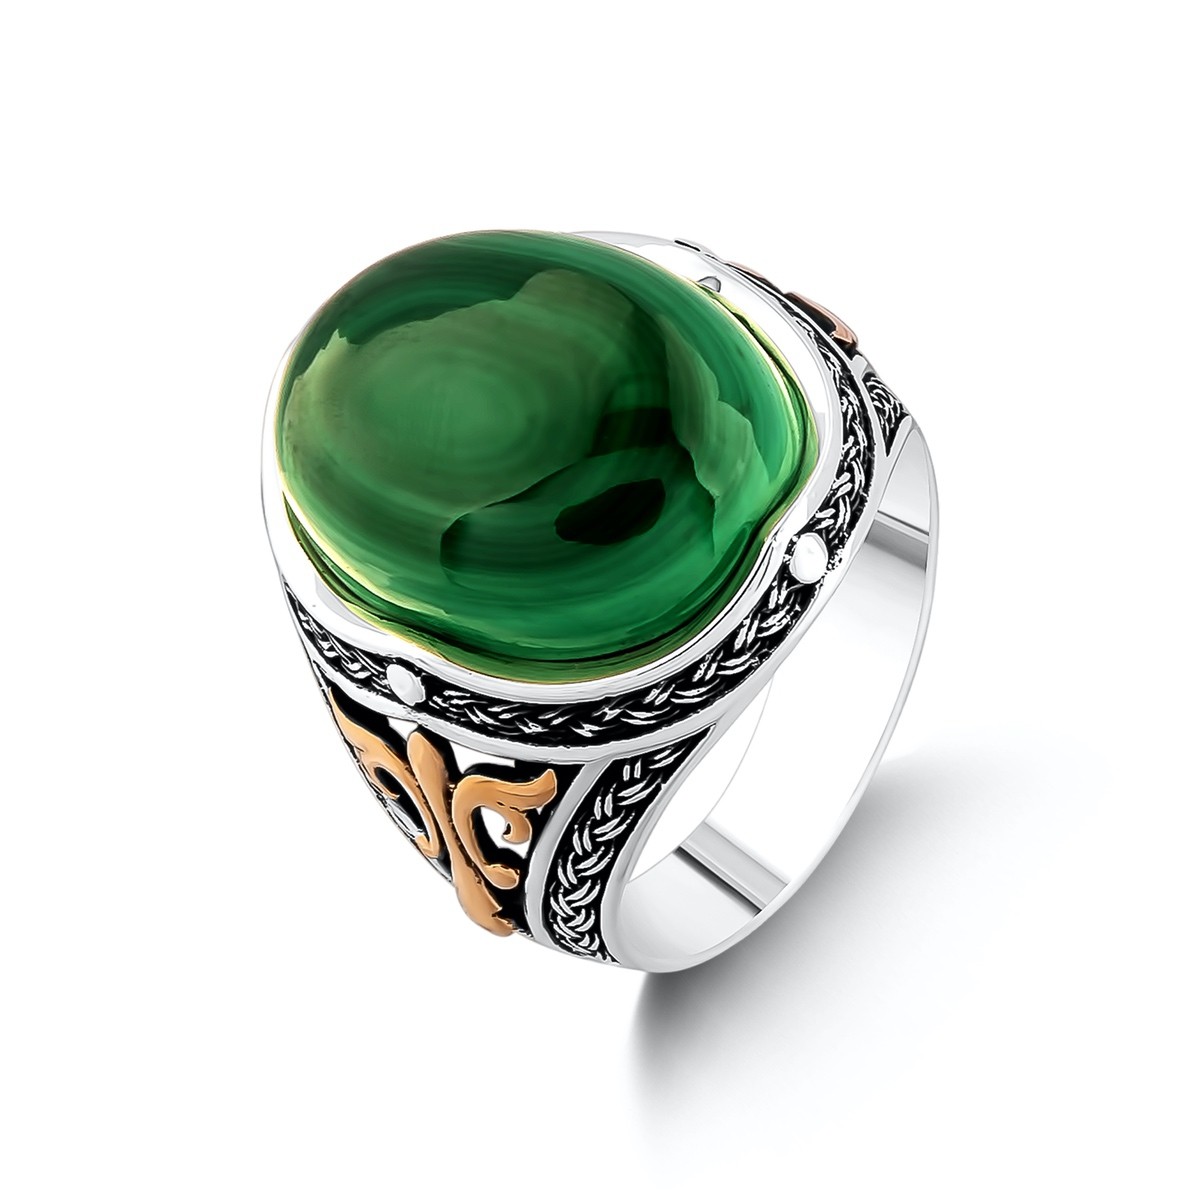 Natural Green Onyx Gemstone Designer Jewelry Solid 925 Sterling Silver Two Tone Ring Size 7